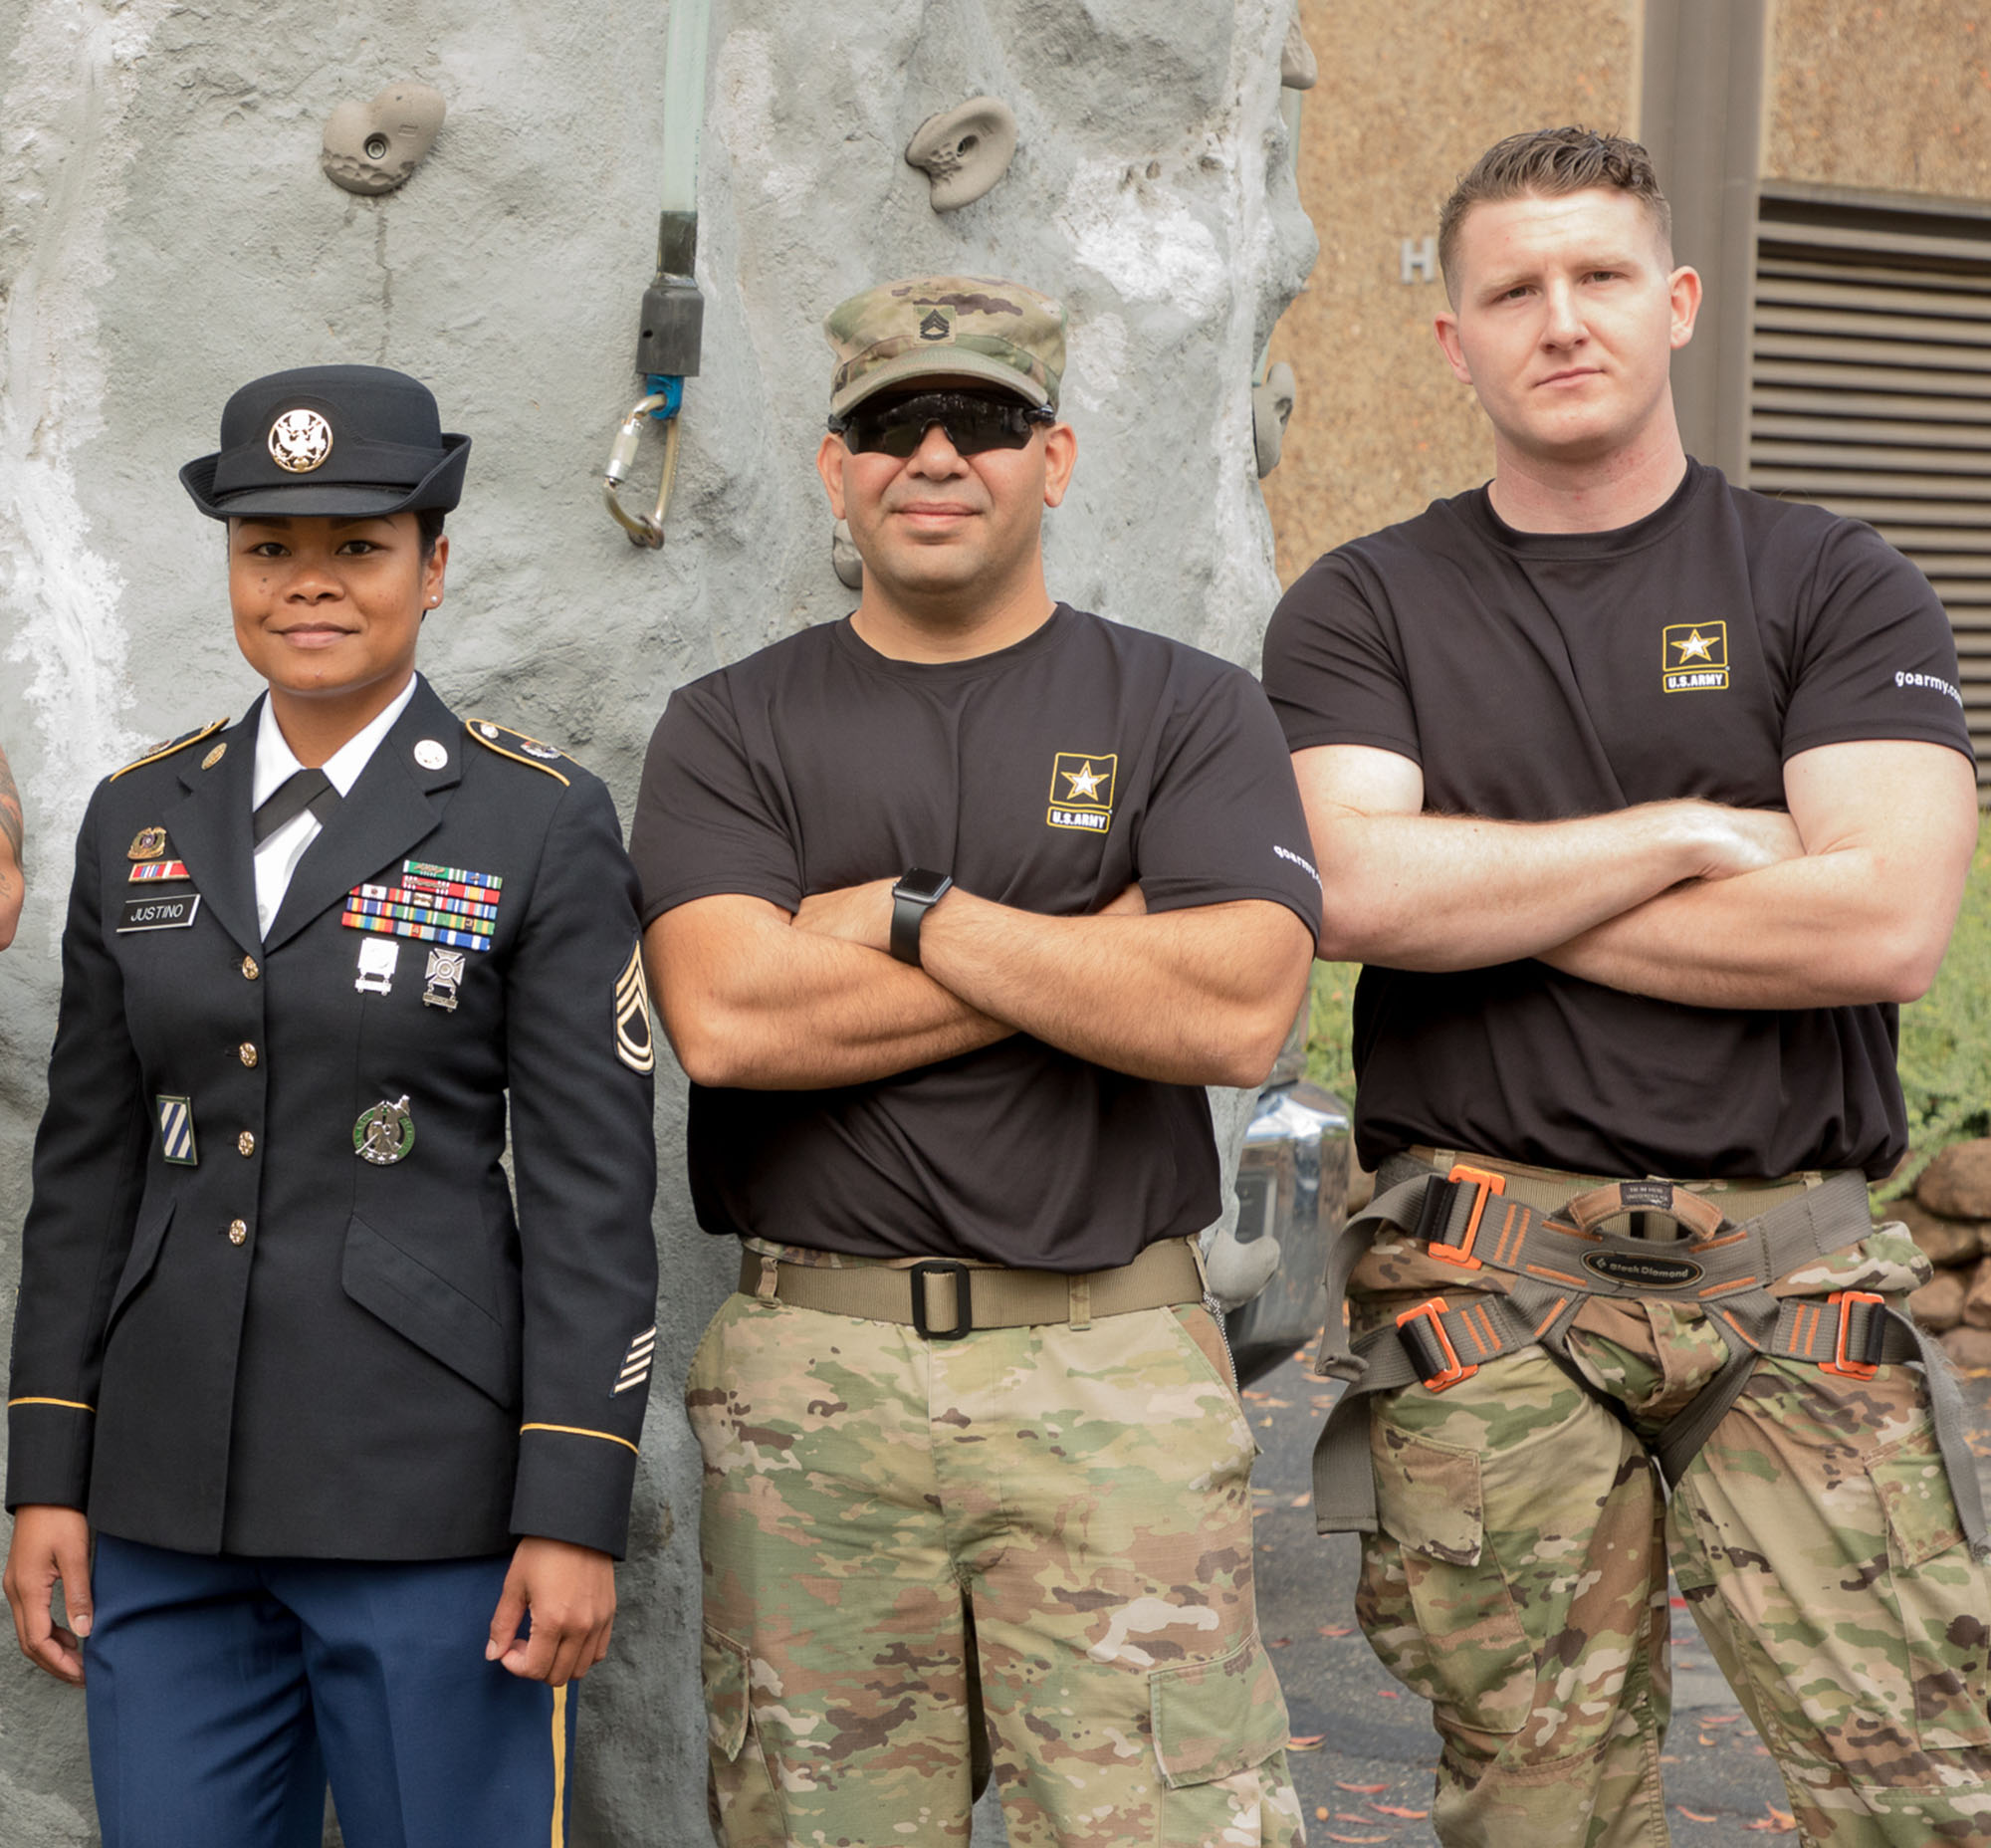 One female army officer in uniform and two male active service members in army fatigues